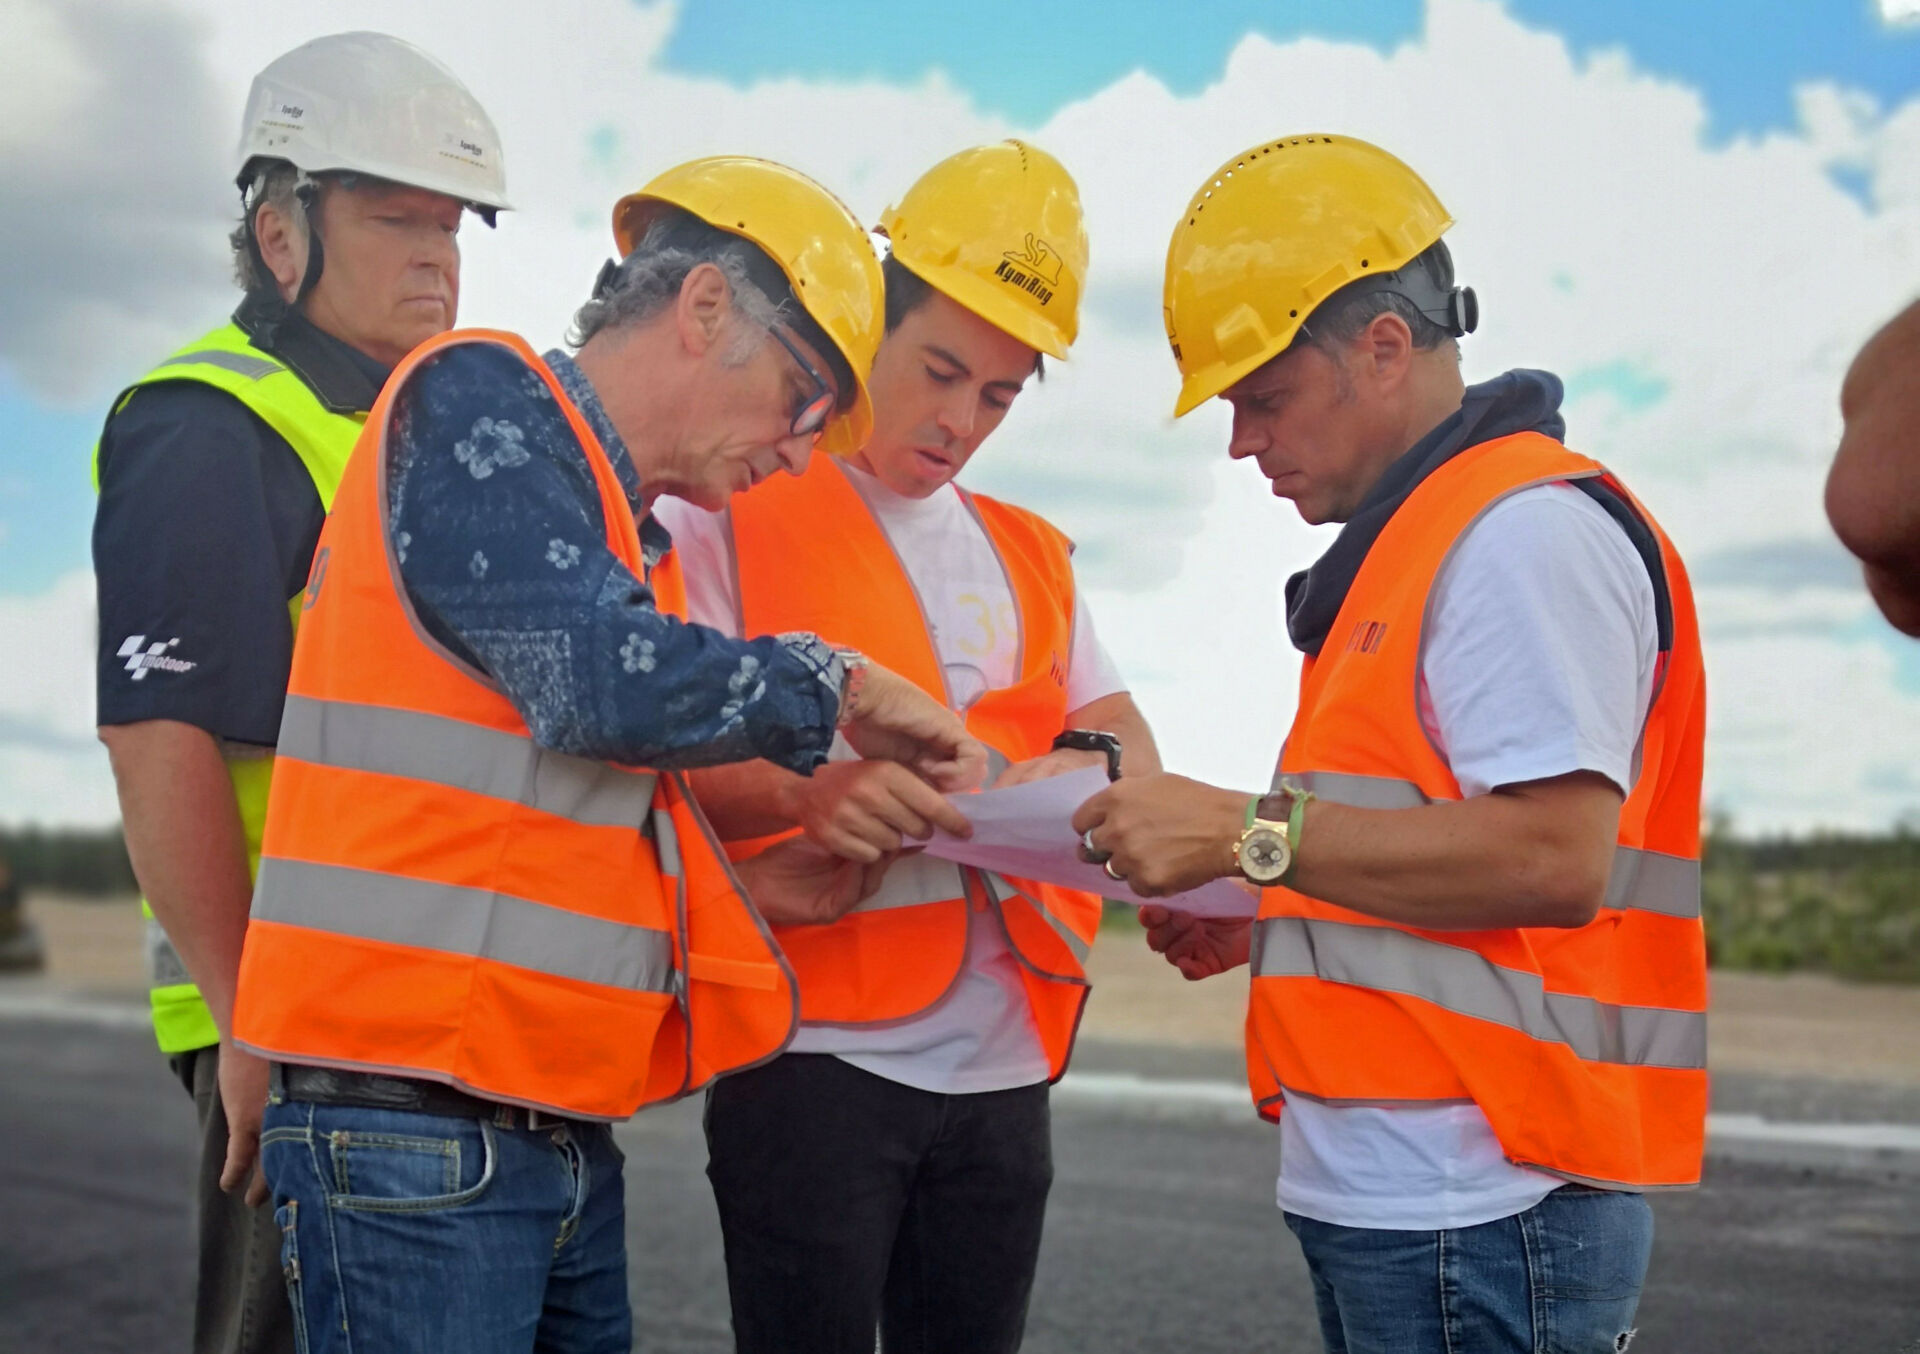 MotoGP officials during an inspection of Finland's KymiRing in 2019. Photo courtesy Dorna.